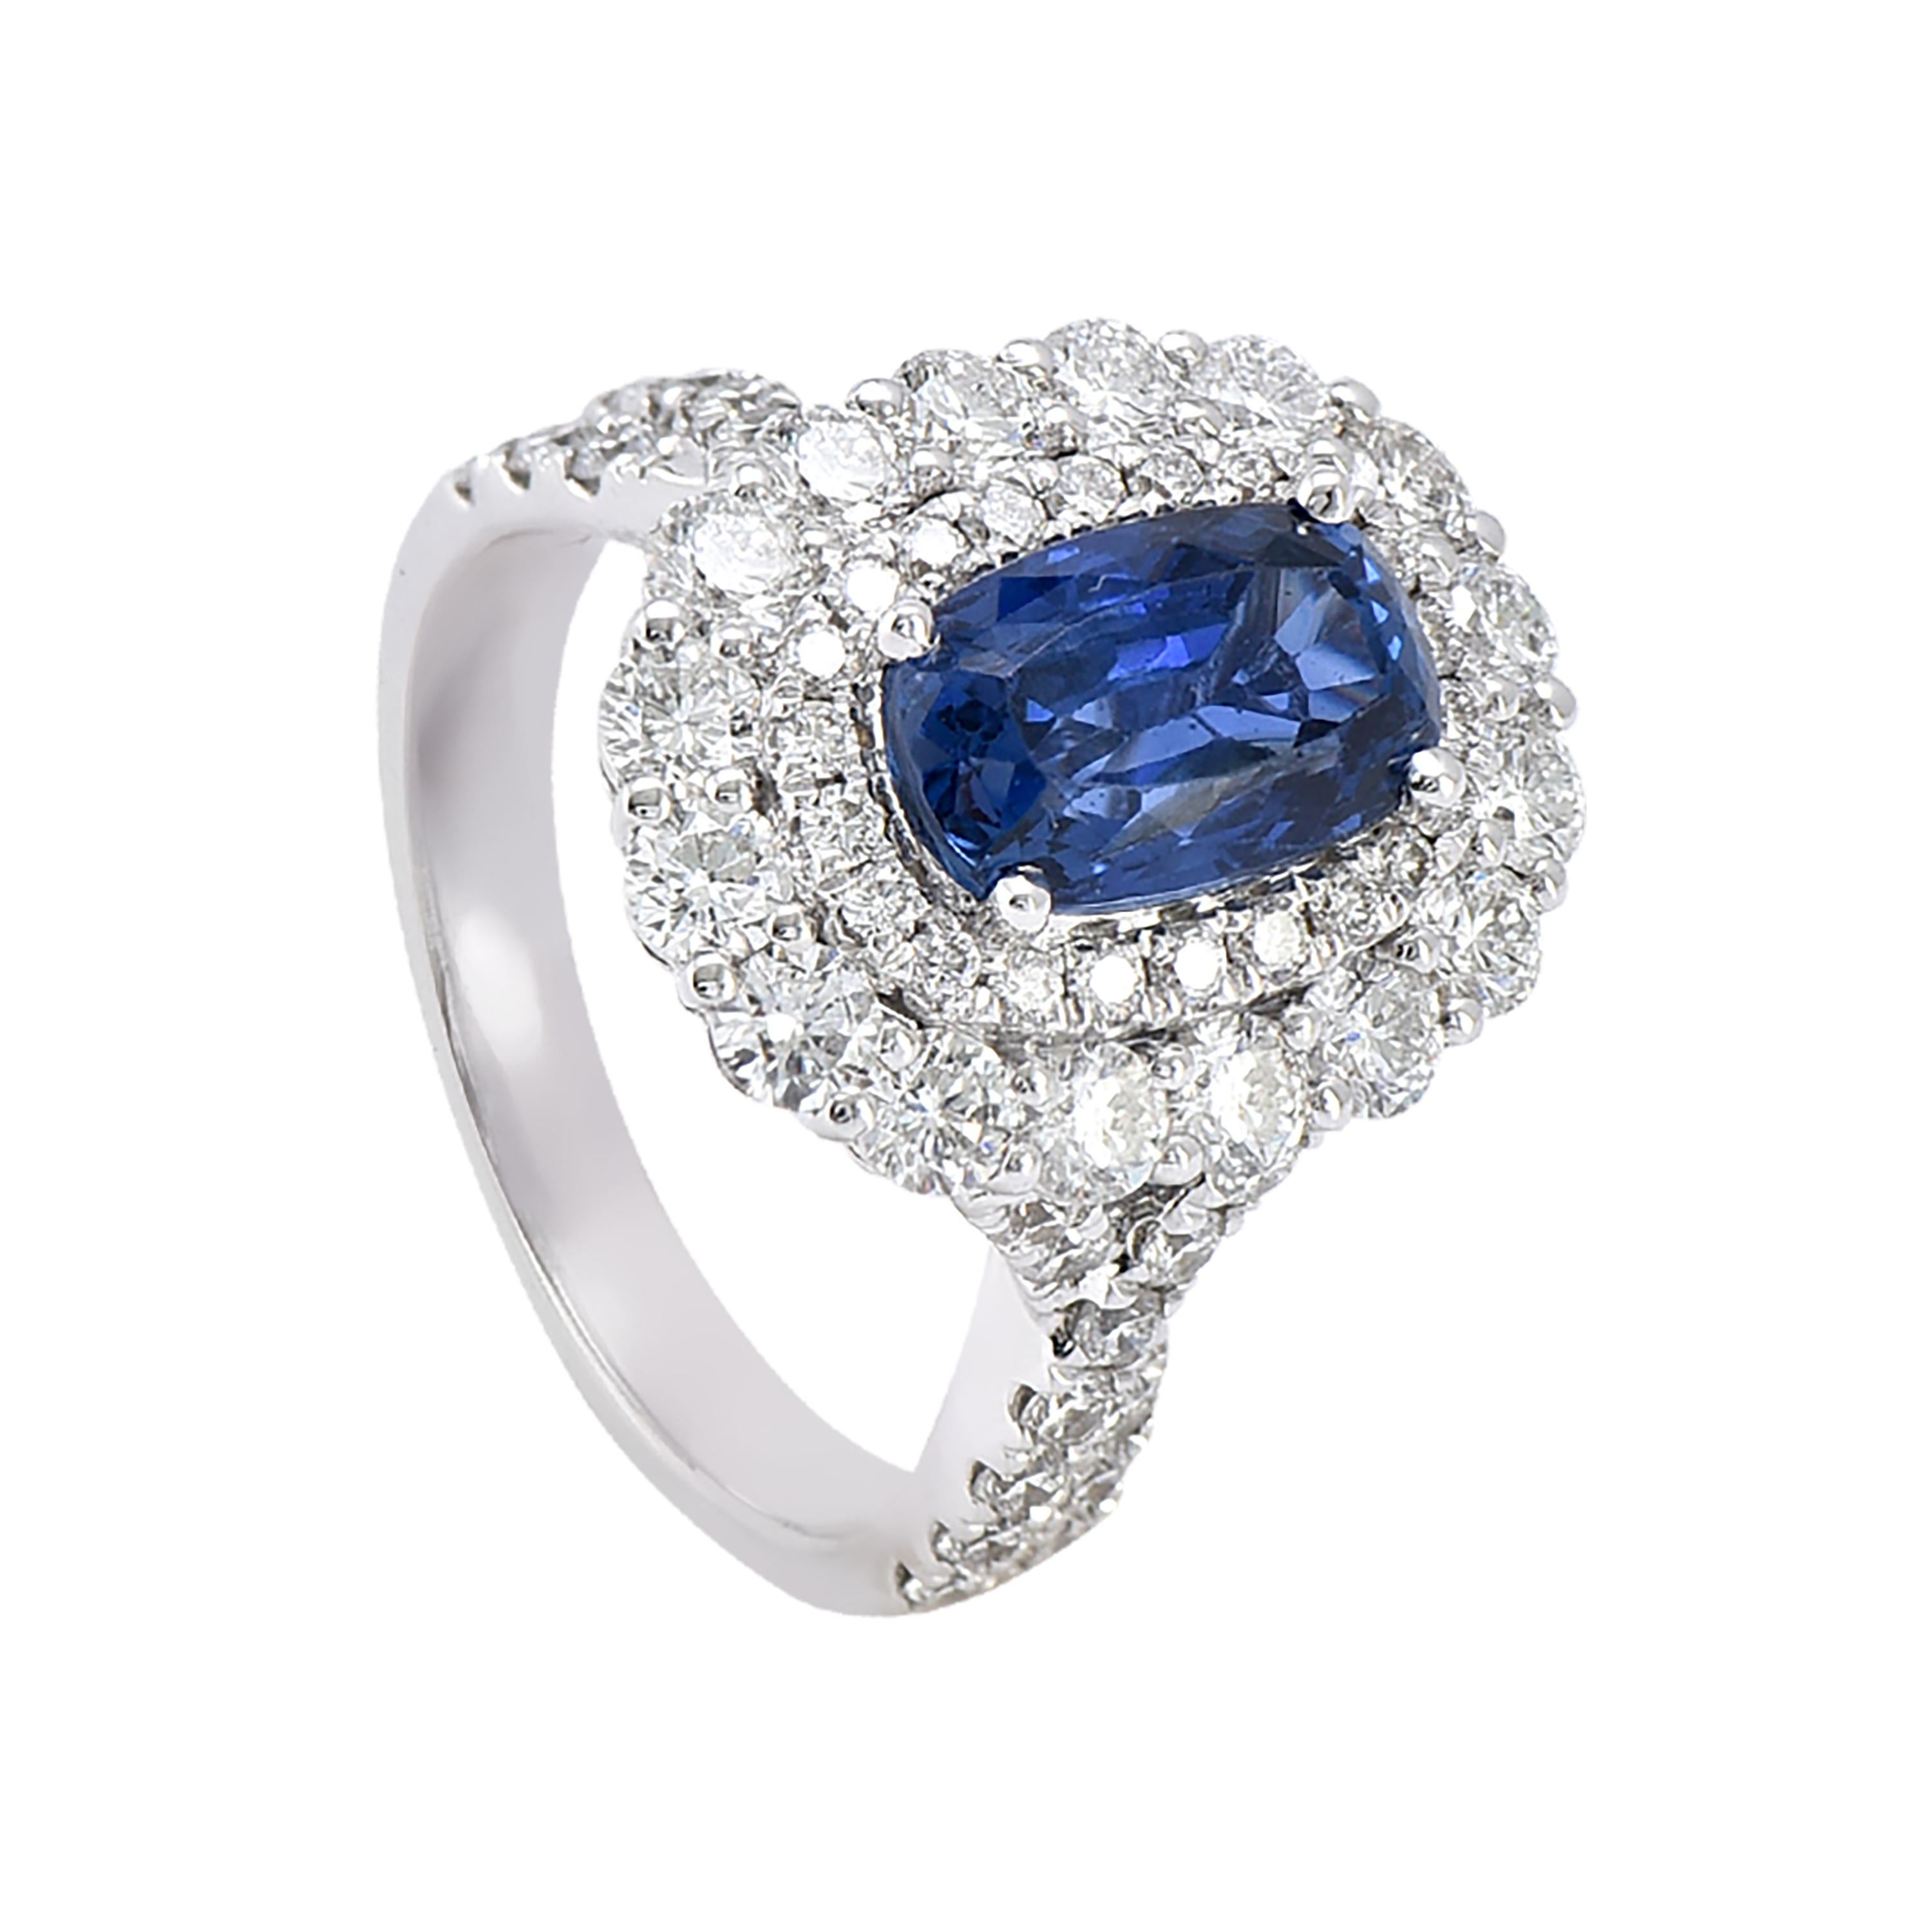 18 karat white gold cocktail ring part of Laviere's Azure collection. The ring is set with a 2.94 carat IGI certified oval blue sapphire, which is surrounded by 1.94 carat of brilliant round diamonds
Gross Weight of the Ring is 7.68 grams. 
Diamond